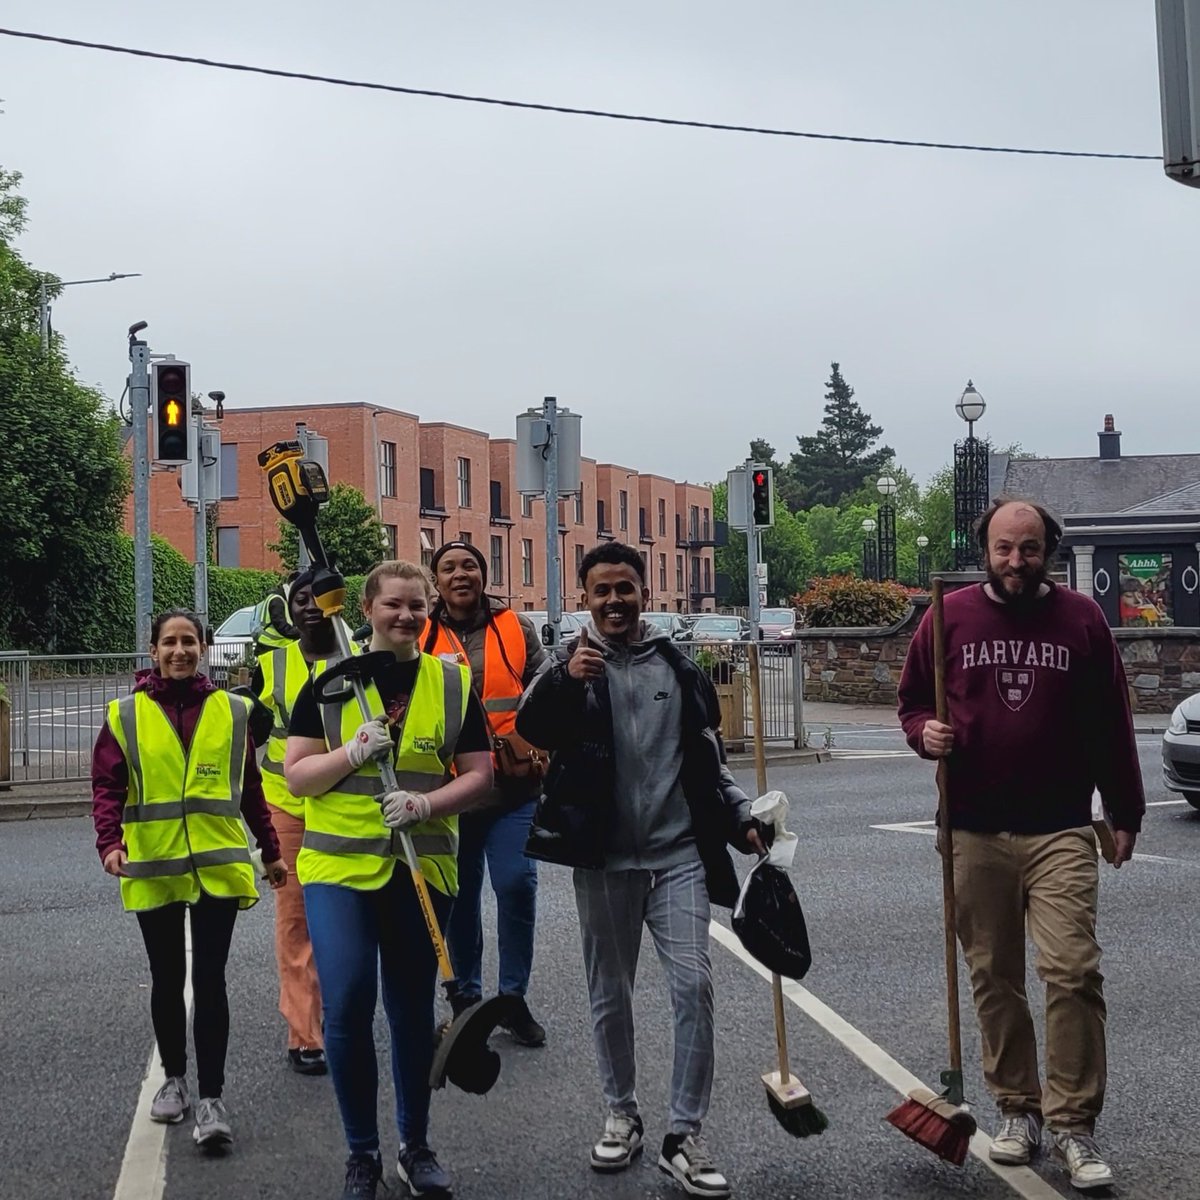 Salute the Tidy Towns volunteers!
Out and about in Blanchardstown village (and many other villages)
every Saturday morning, & Wednesday evening
You are welcome to join! 🌱🏵🌿🧹🌳
#LE24 #dubw #dublin15 #fingal #tidytowns